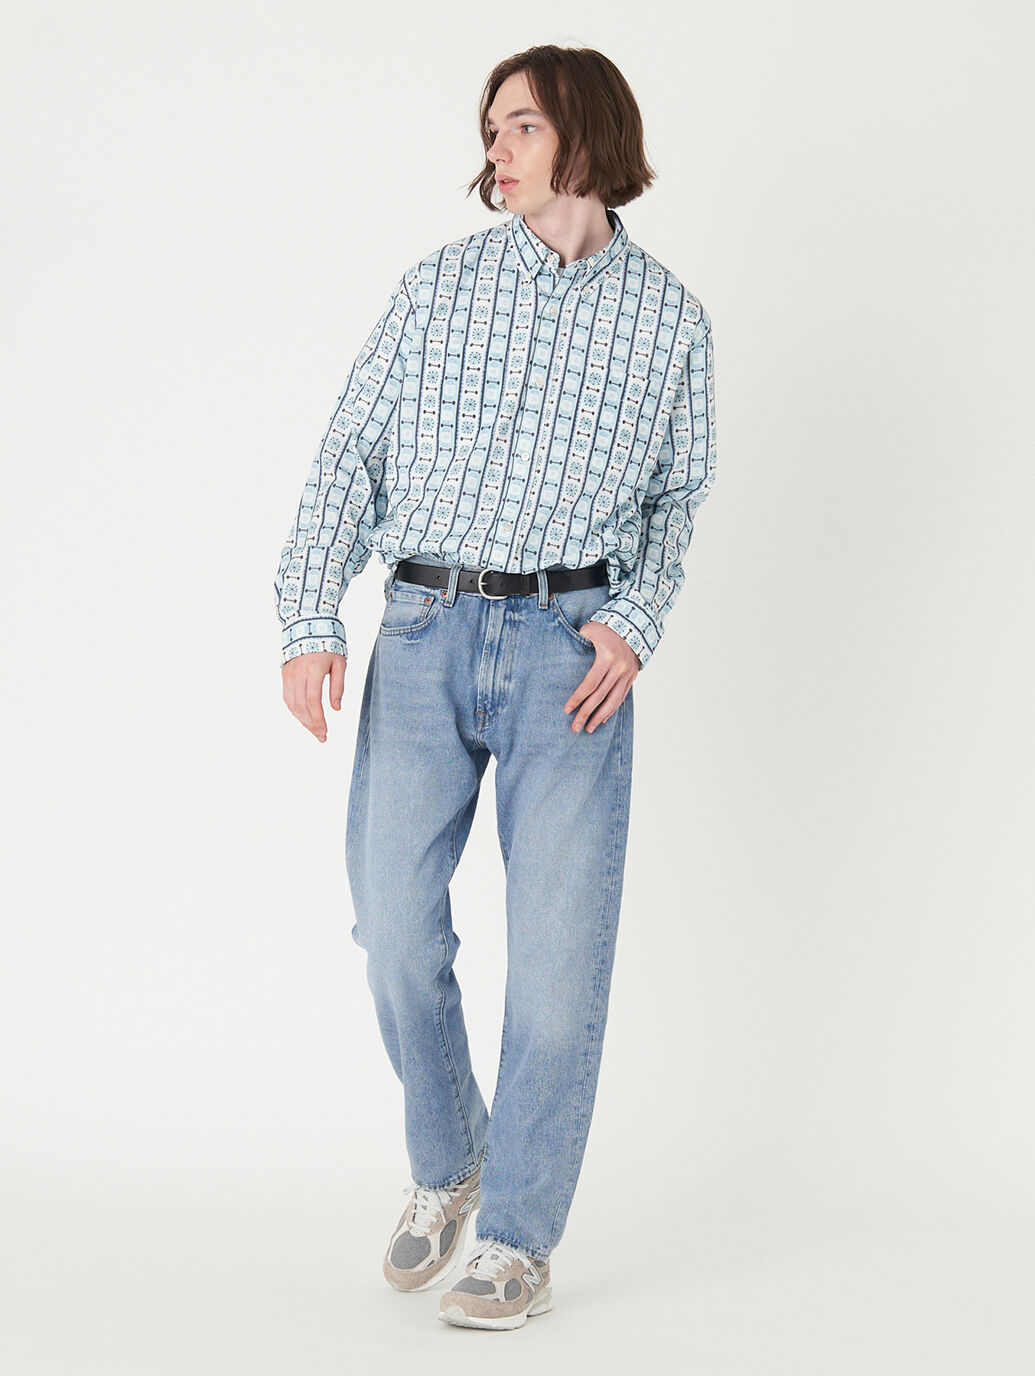 LEVI'S® VINTAGE CLOTHING70'S BUTTON UP シャツ｜リーバイス® 公式通販